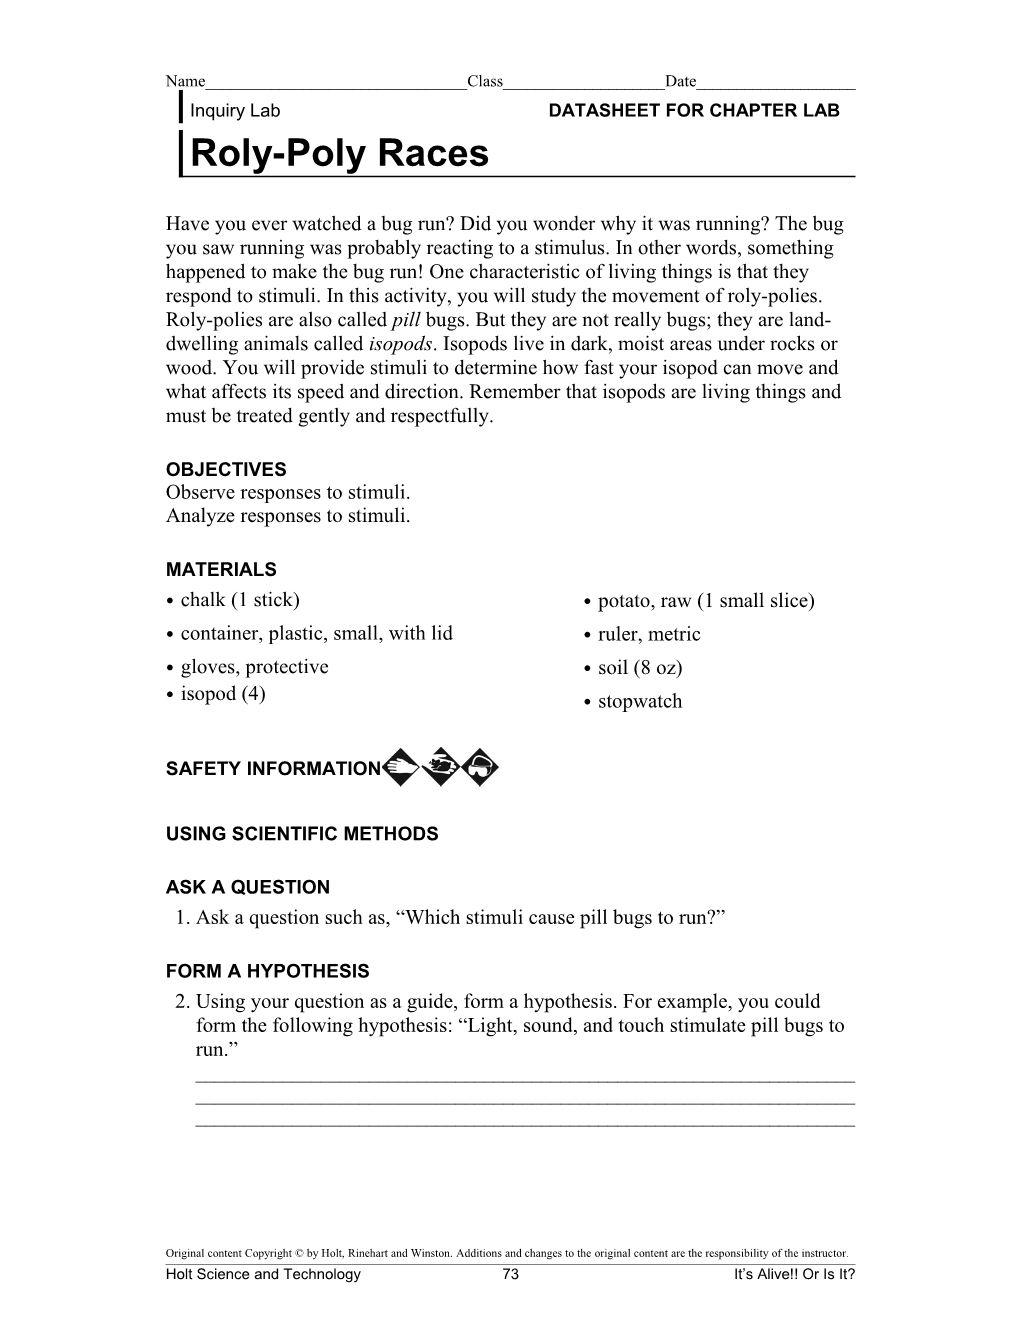 Inquiry Lab DATASHEET for CHAPTER LAB